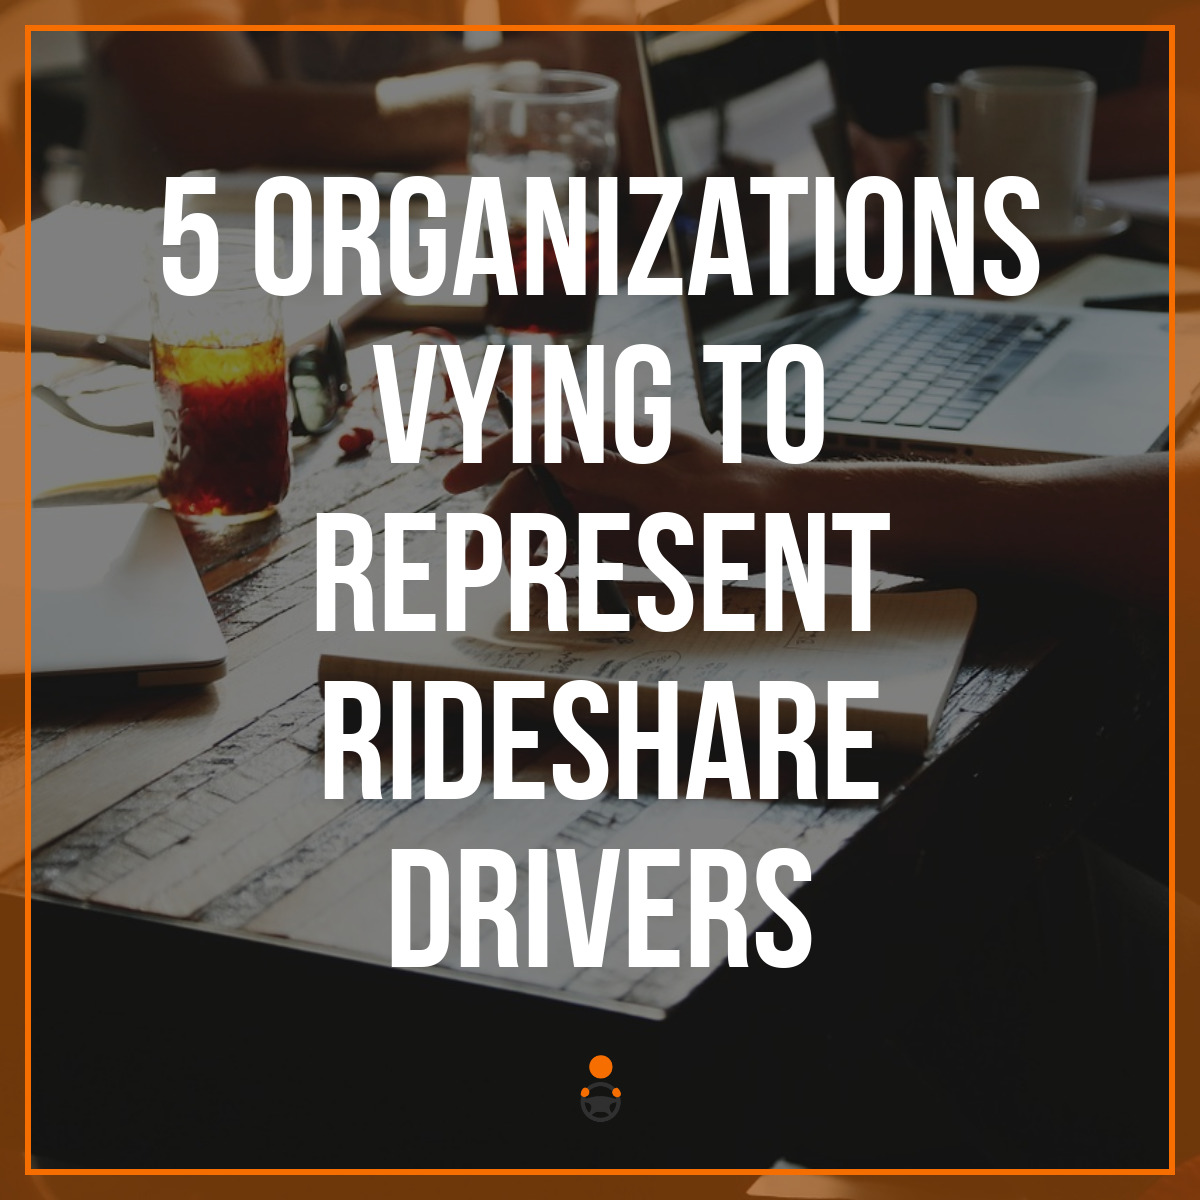 5 Organizations Vying to Represent Rideshare Drivers